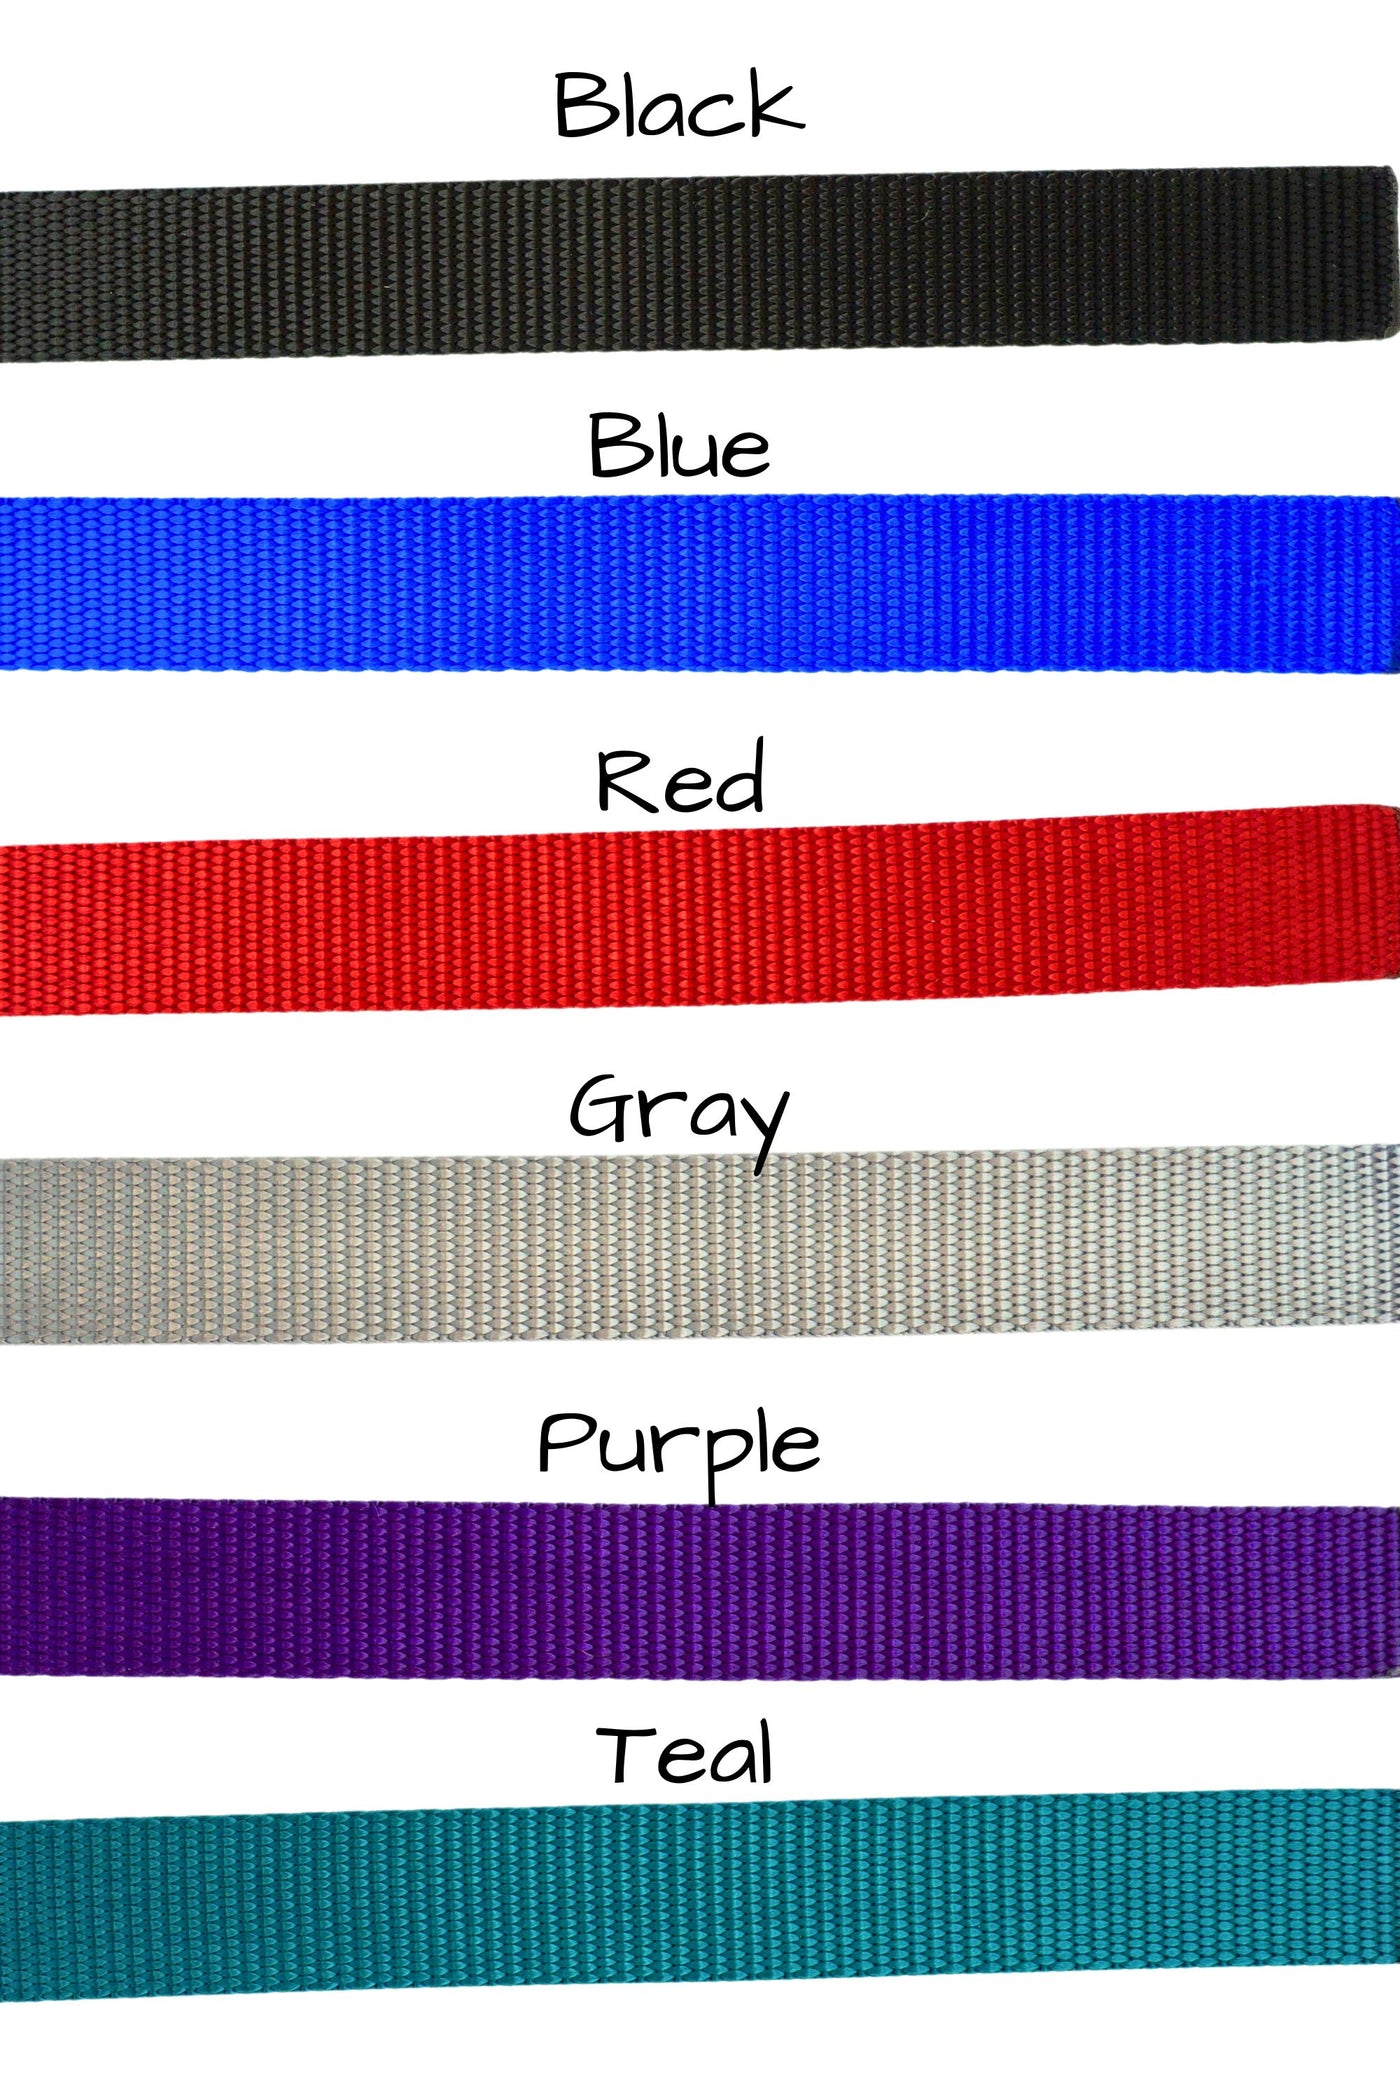 Six classic colors are available for the adjustable no-pull leashes, including black, red, blue, gray, purple, or teal